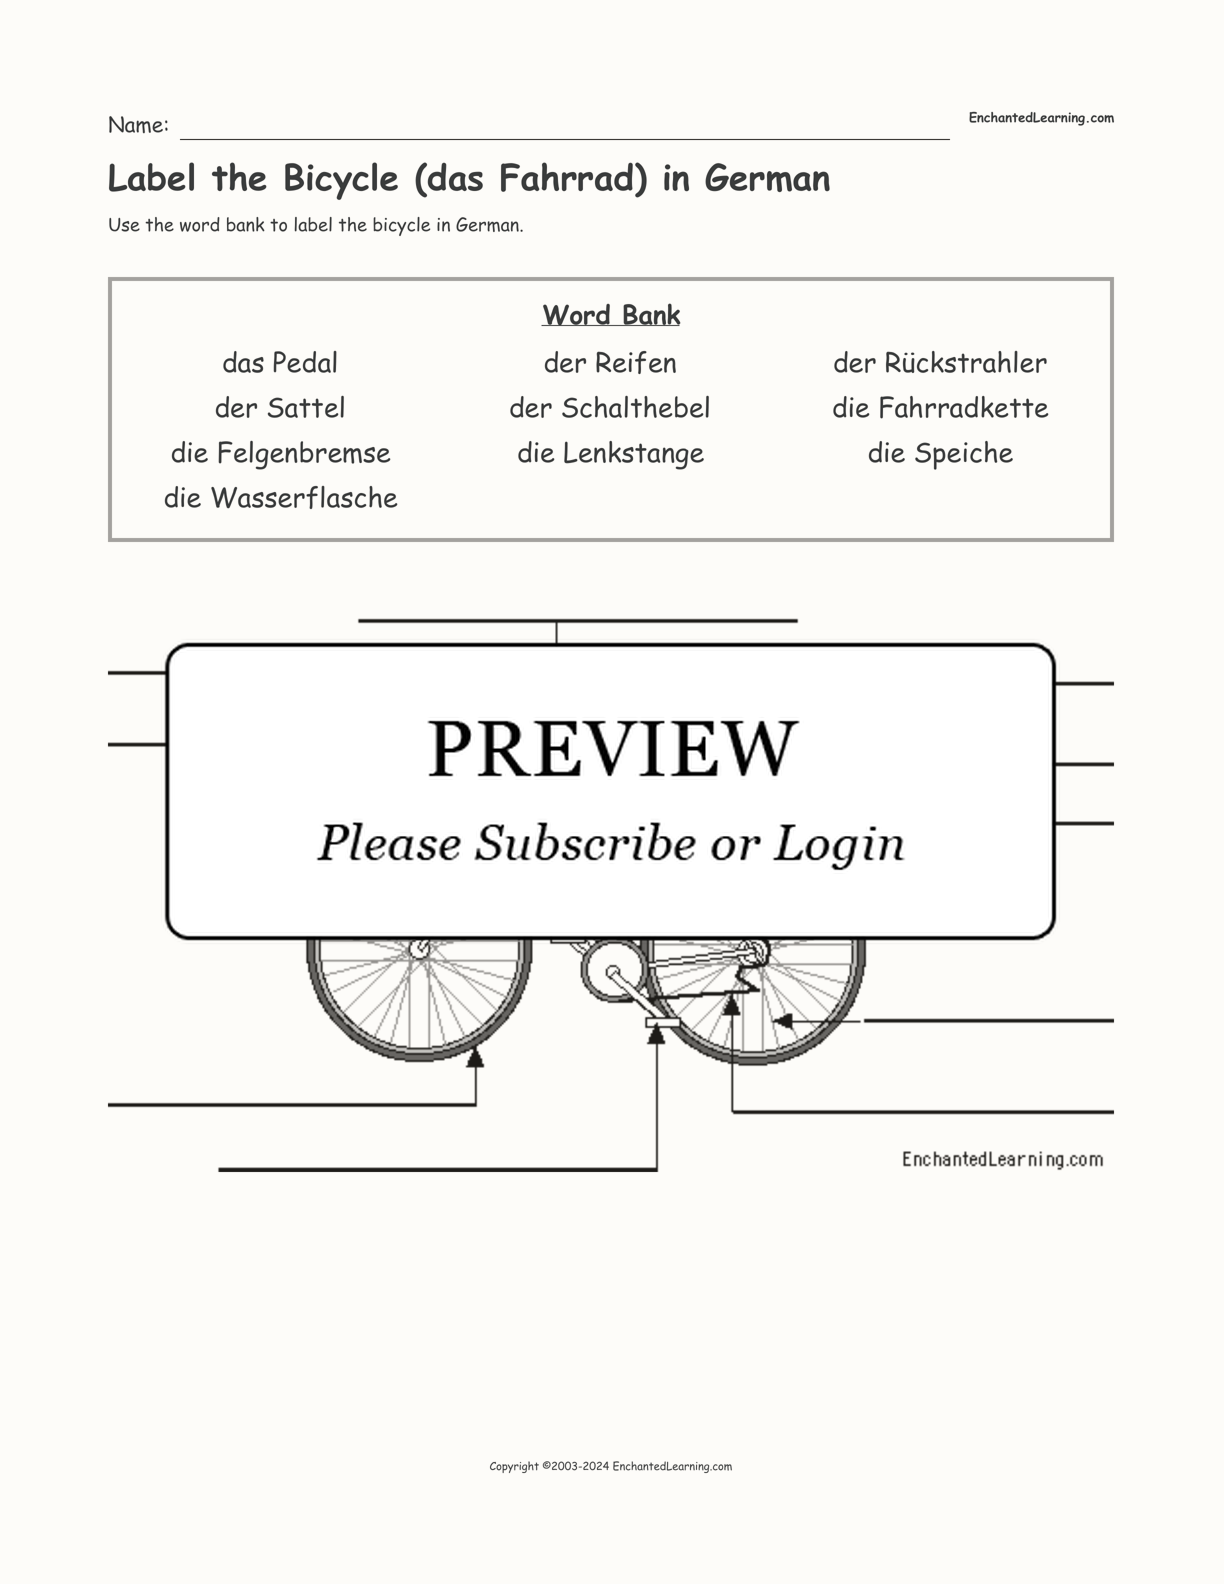 Label the Bicycle (das Fahrrad) in German interactive worksheet page 1